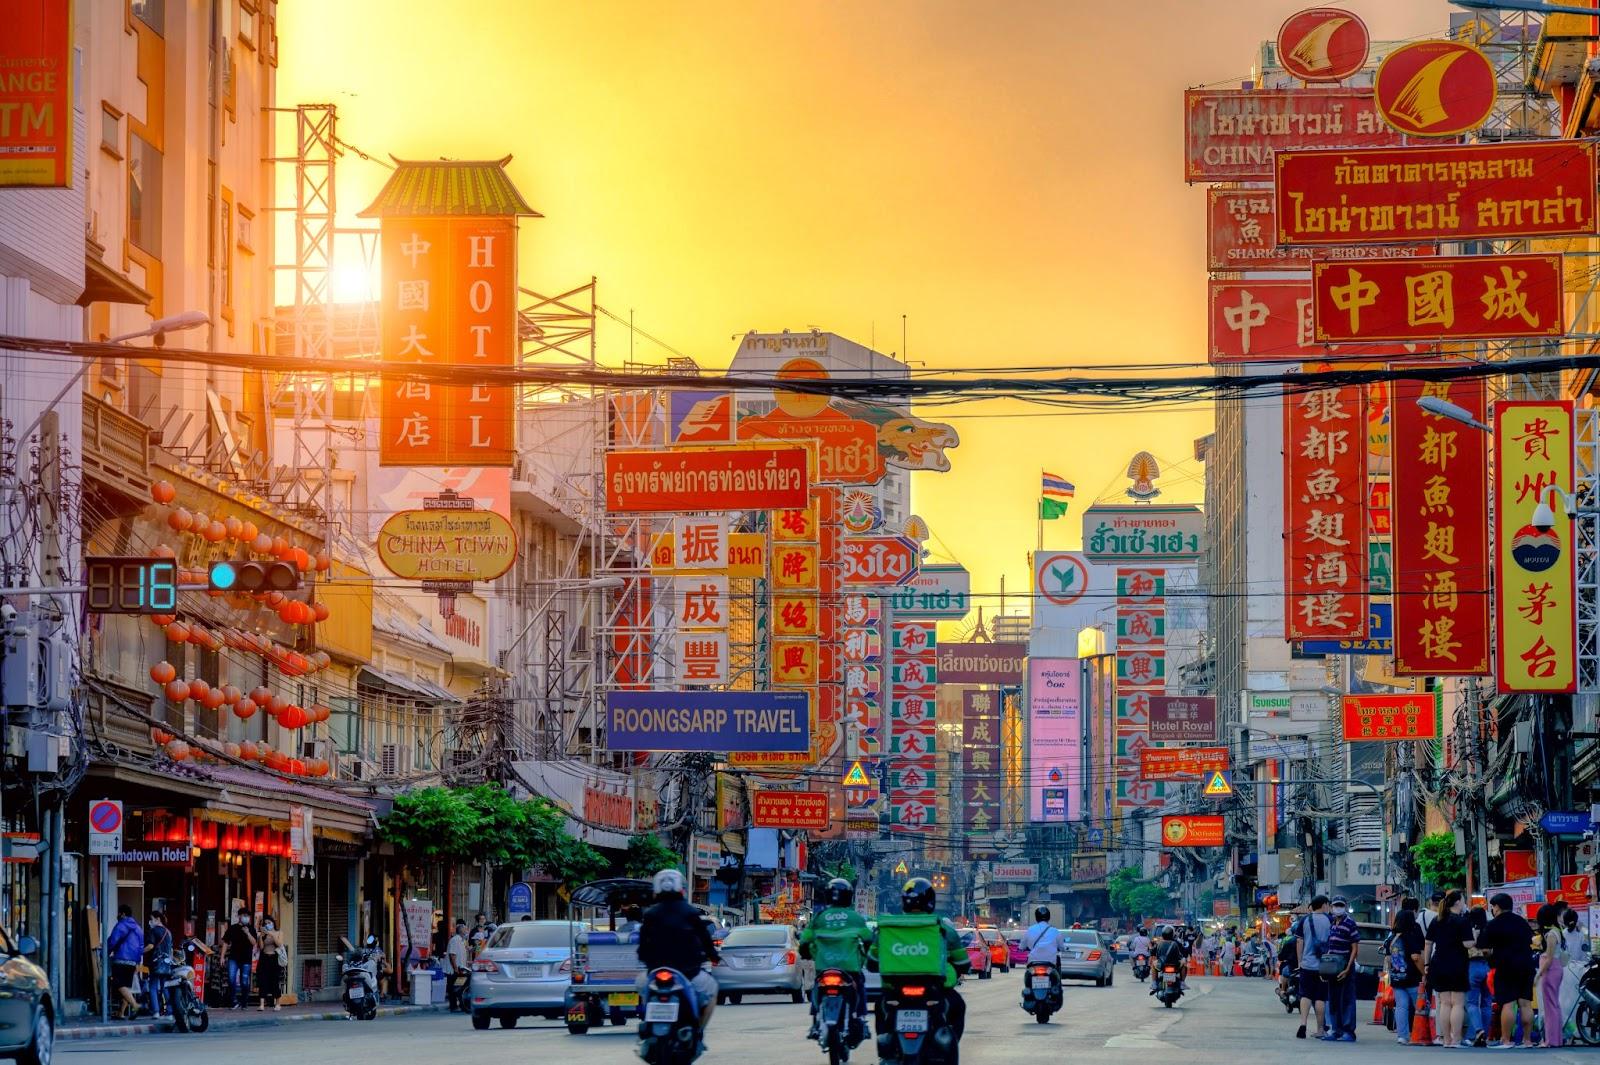 Evening in Chinatown, Chinatown, famous street food in Thailand,